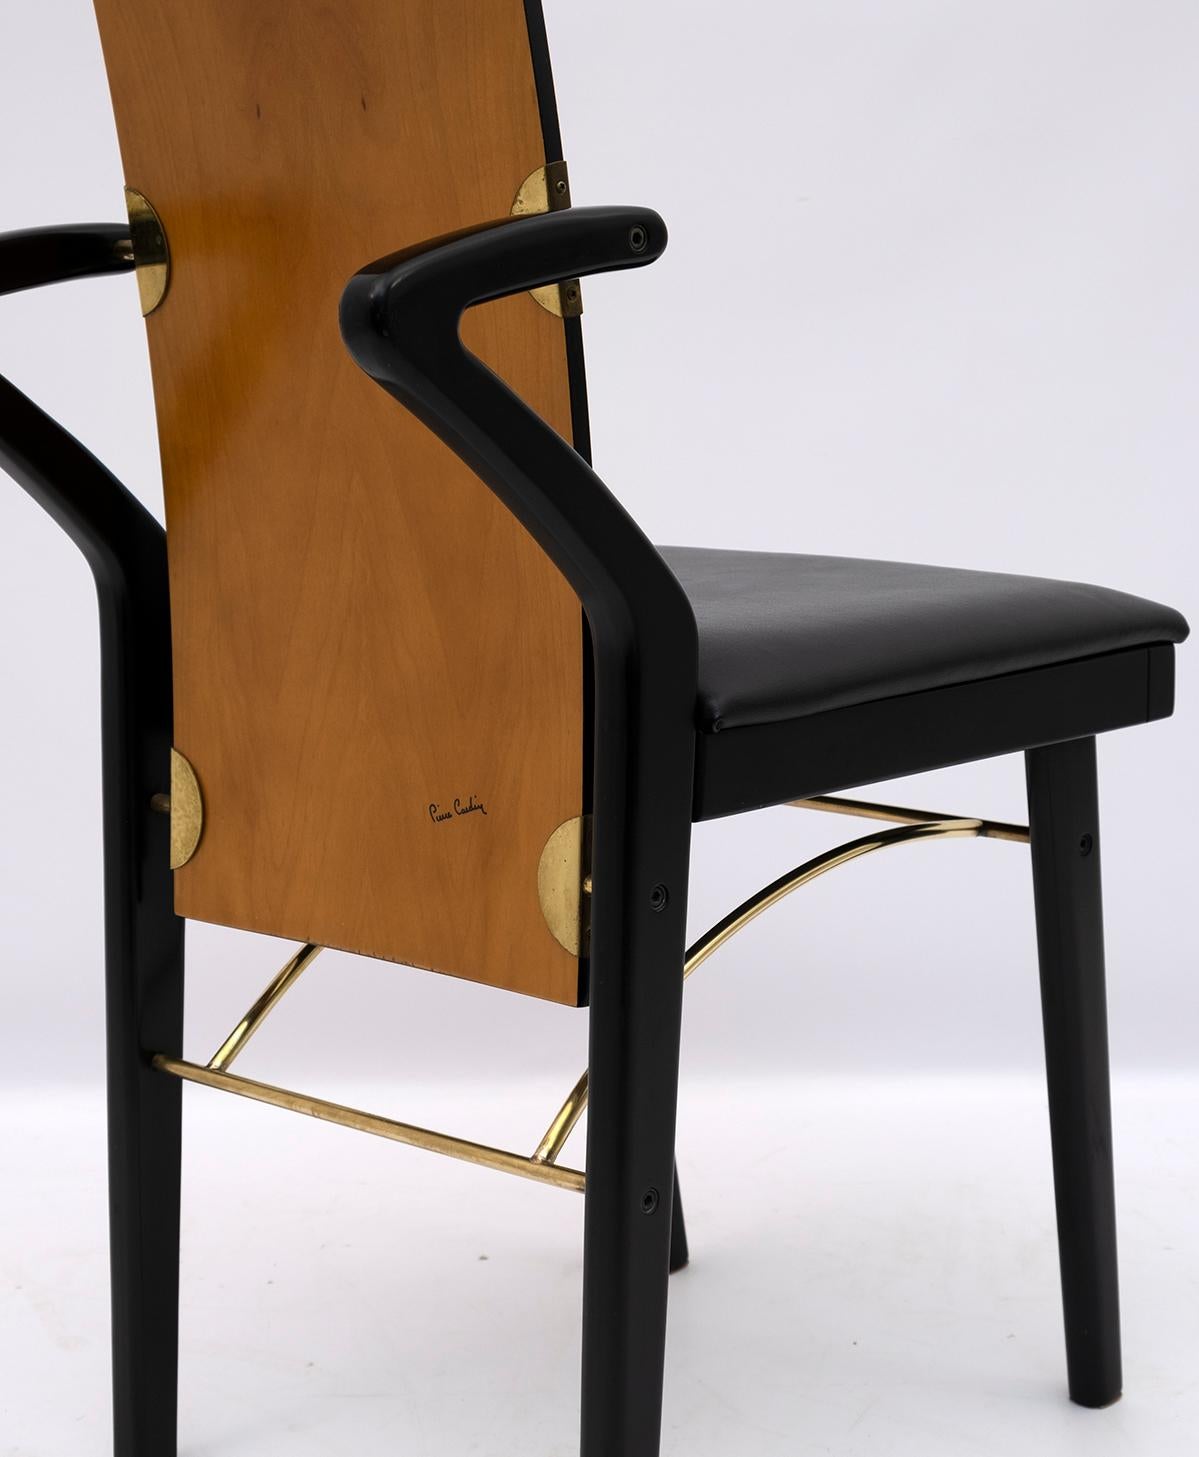 Four Post-Modern Italian Dining Chairs by Pierre Cardin, 1980s For Sale 8